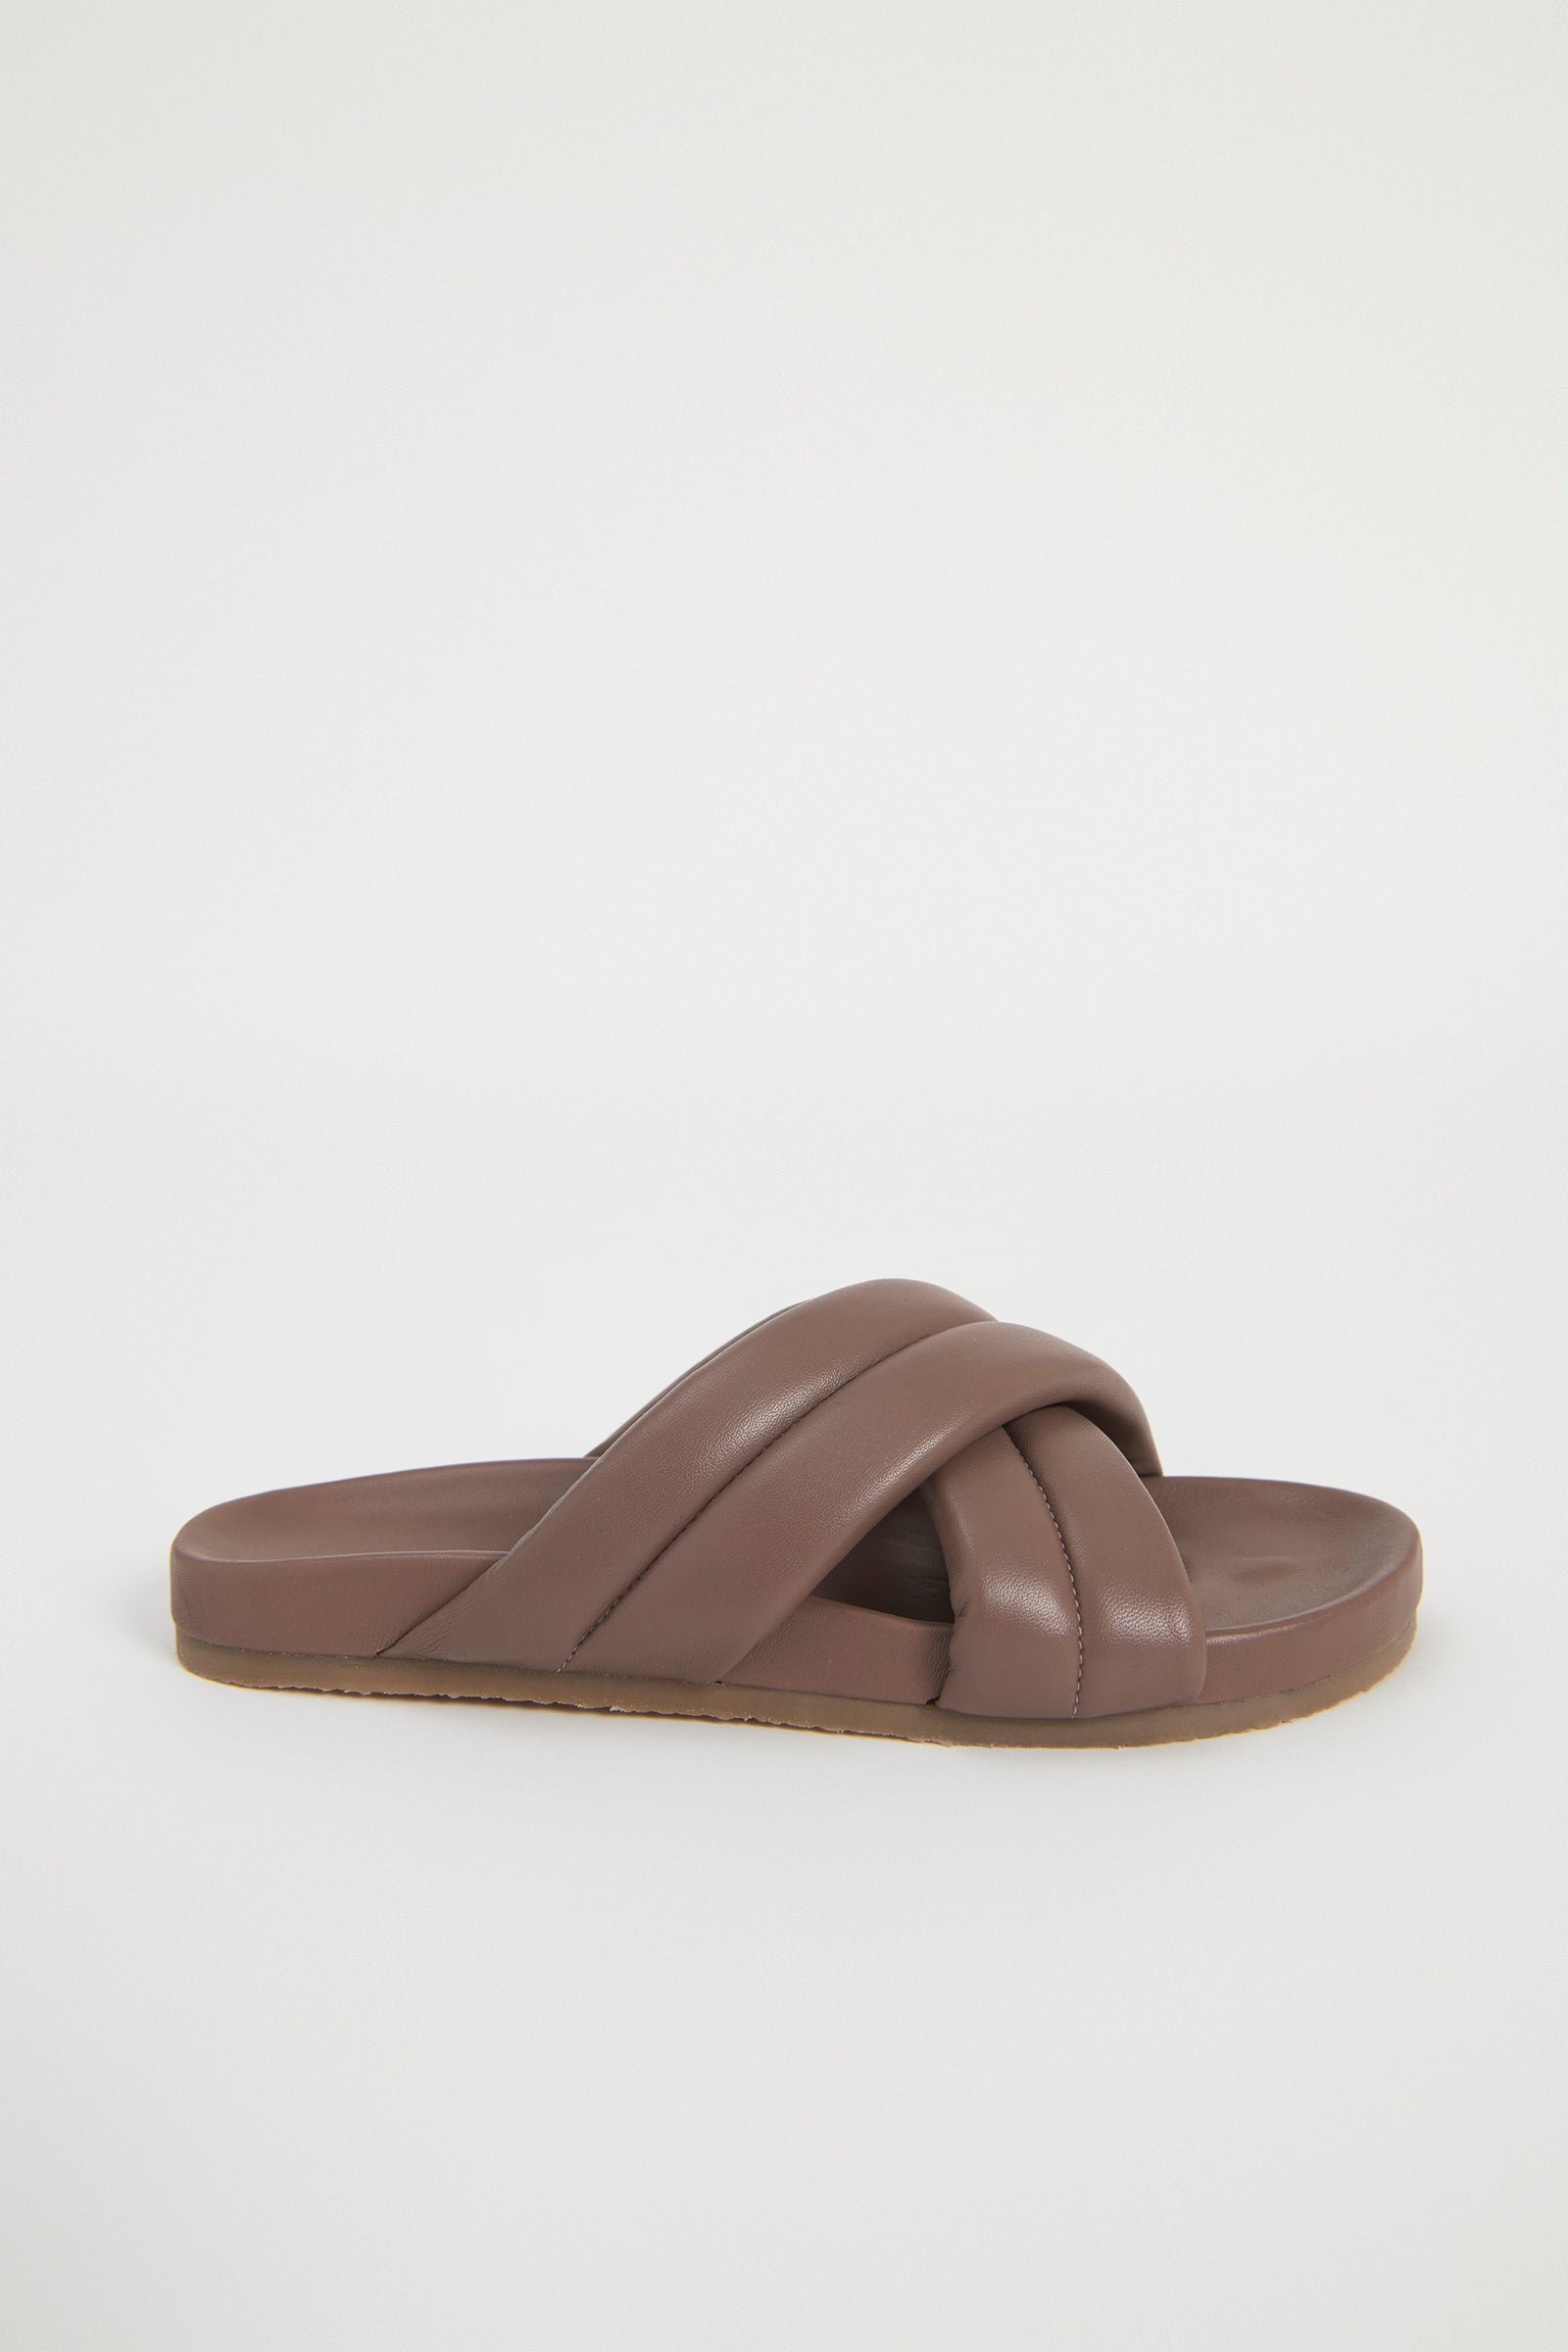 Nude Lucy Crossover Leather Slide in Soot